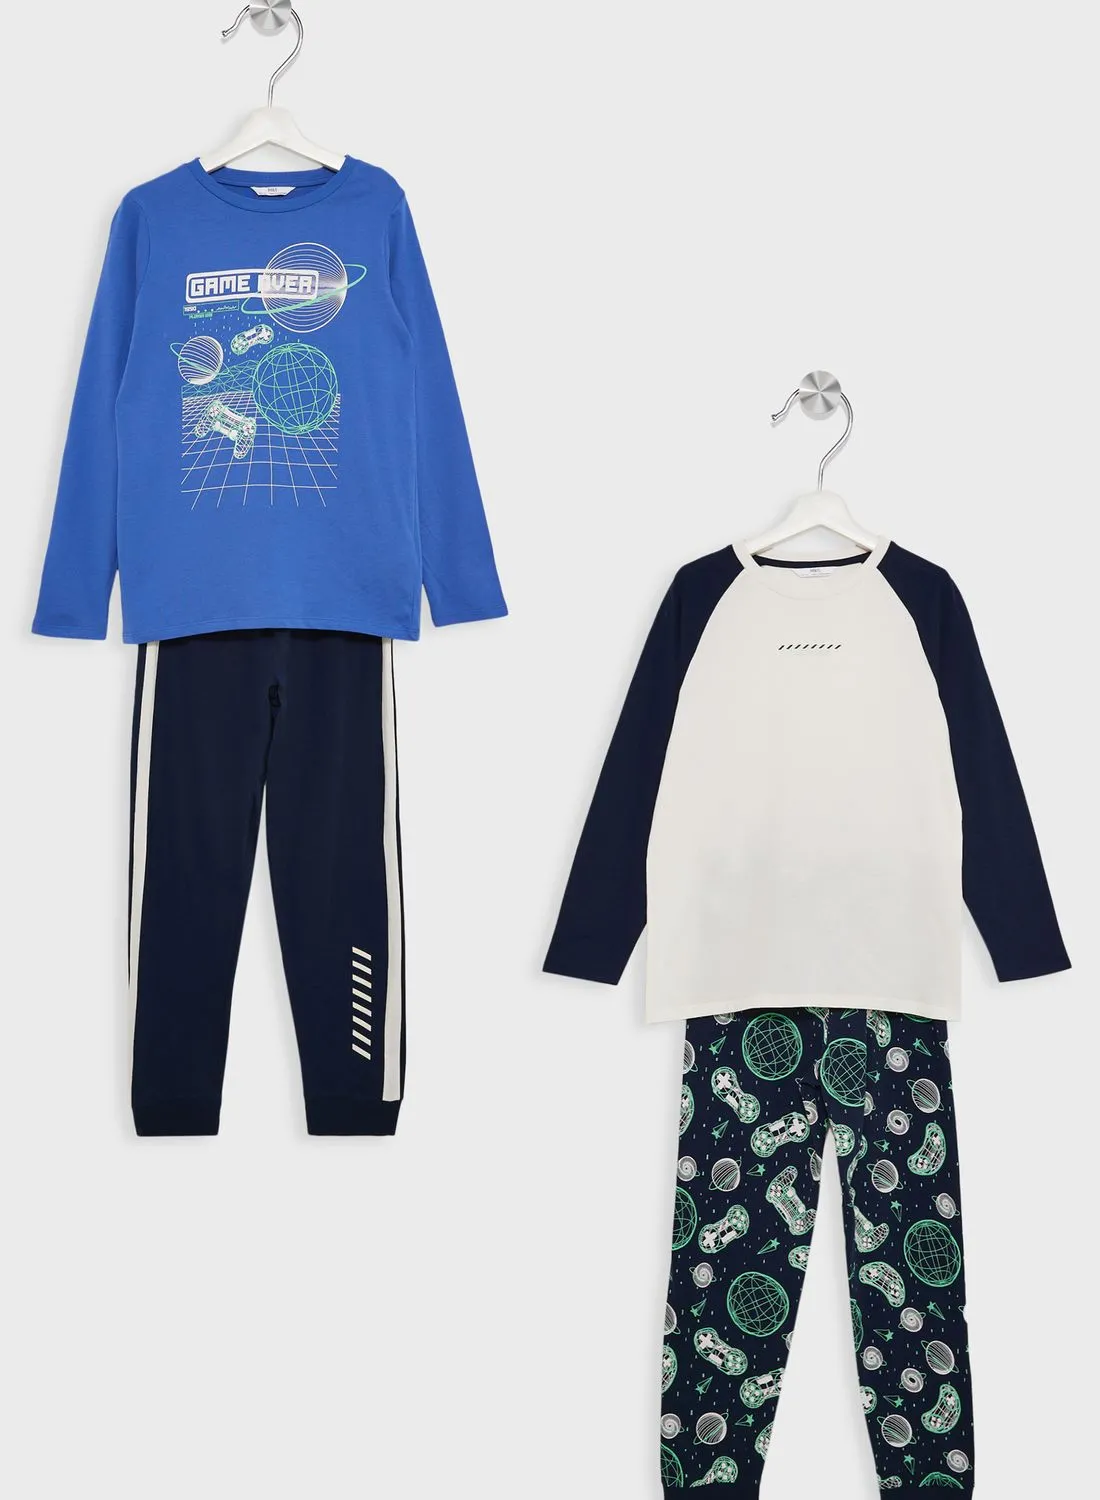 Marks & Spencer Youth 2 Pack Printed T-shirt and Pyjama Set